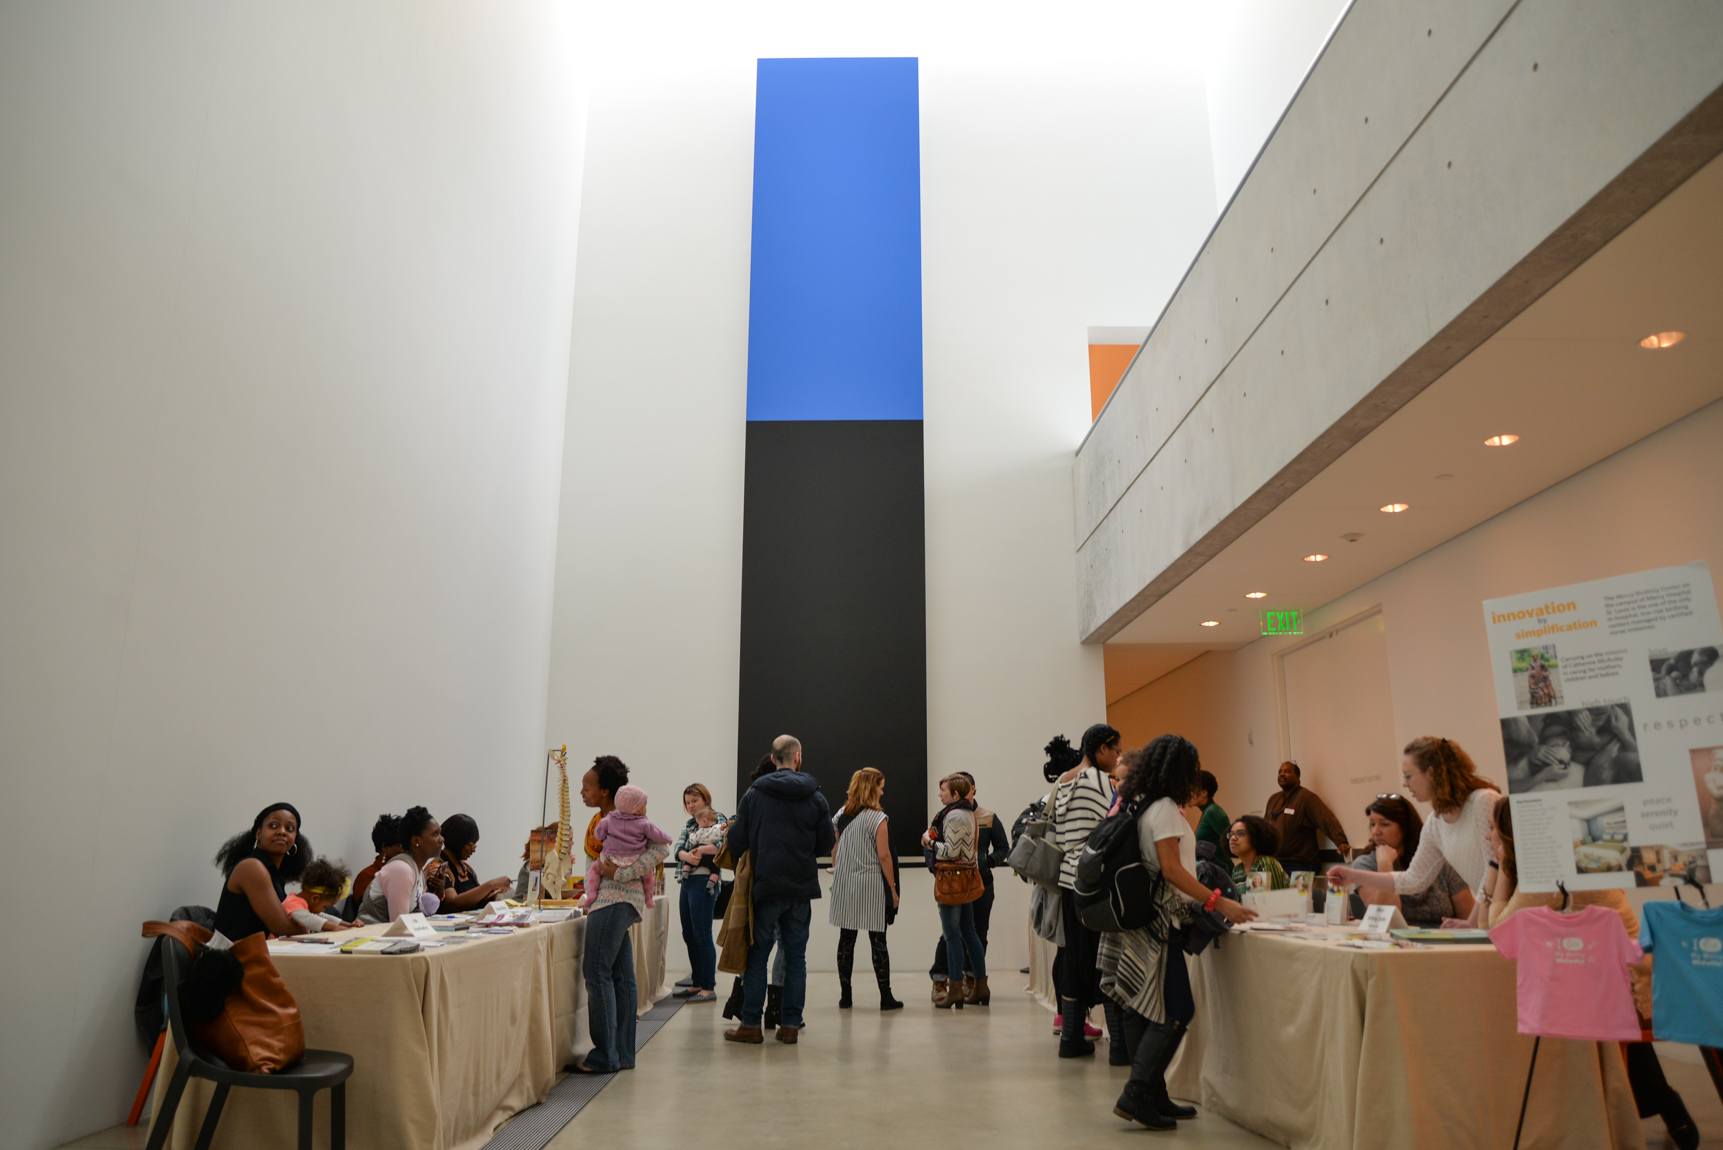 Visitors attend a parenting workshop in the Lower-Main Gallery.